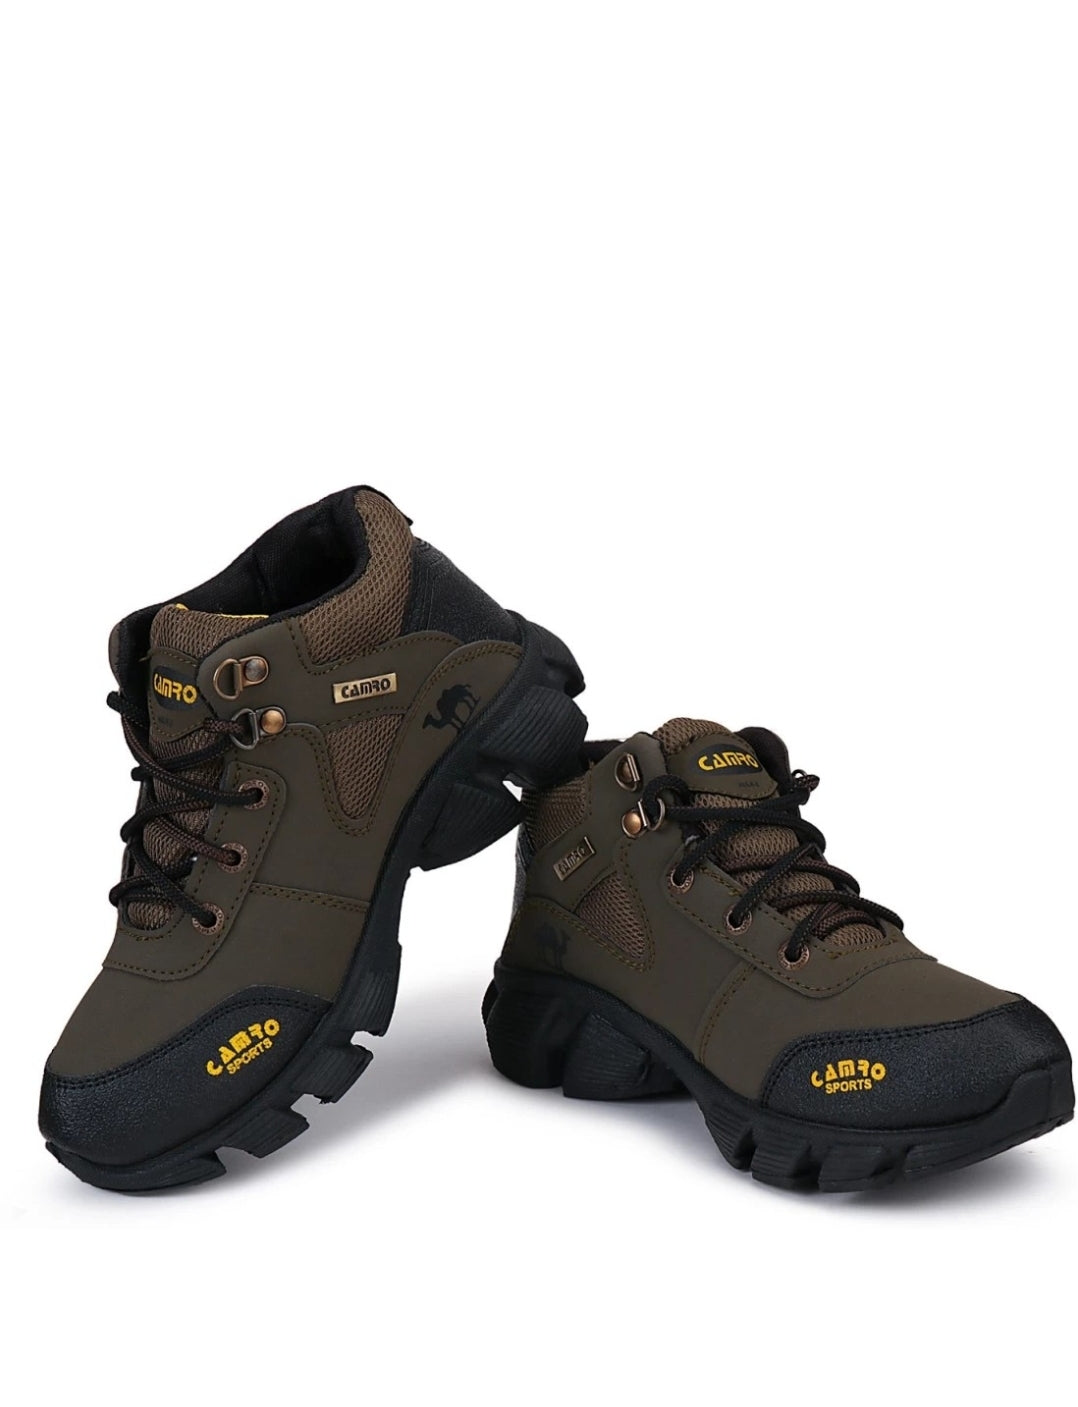 CAMRO HULK-2 Boots | Casual Mid Ankle Lace up Shoes for Trekking, Hiking, Walking